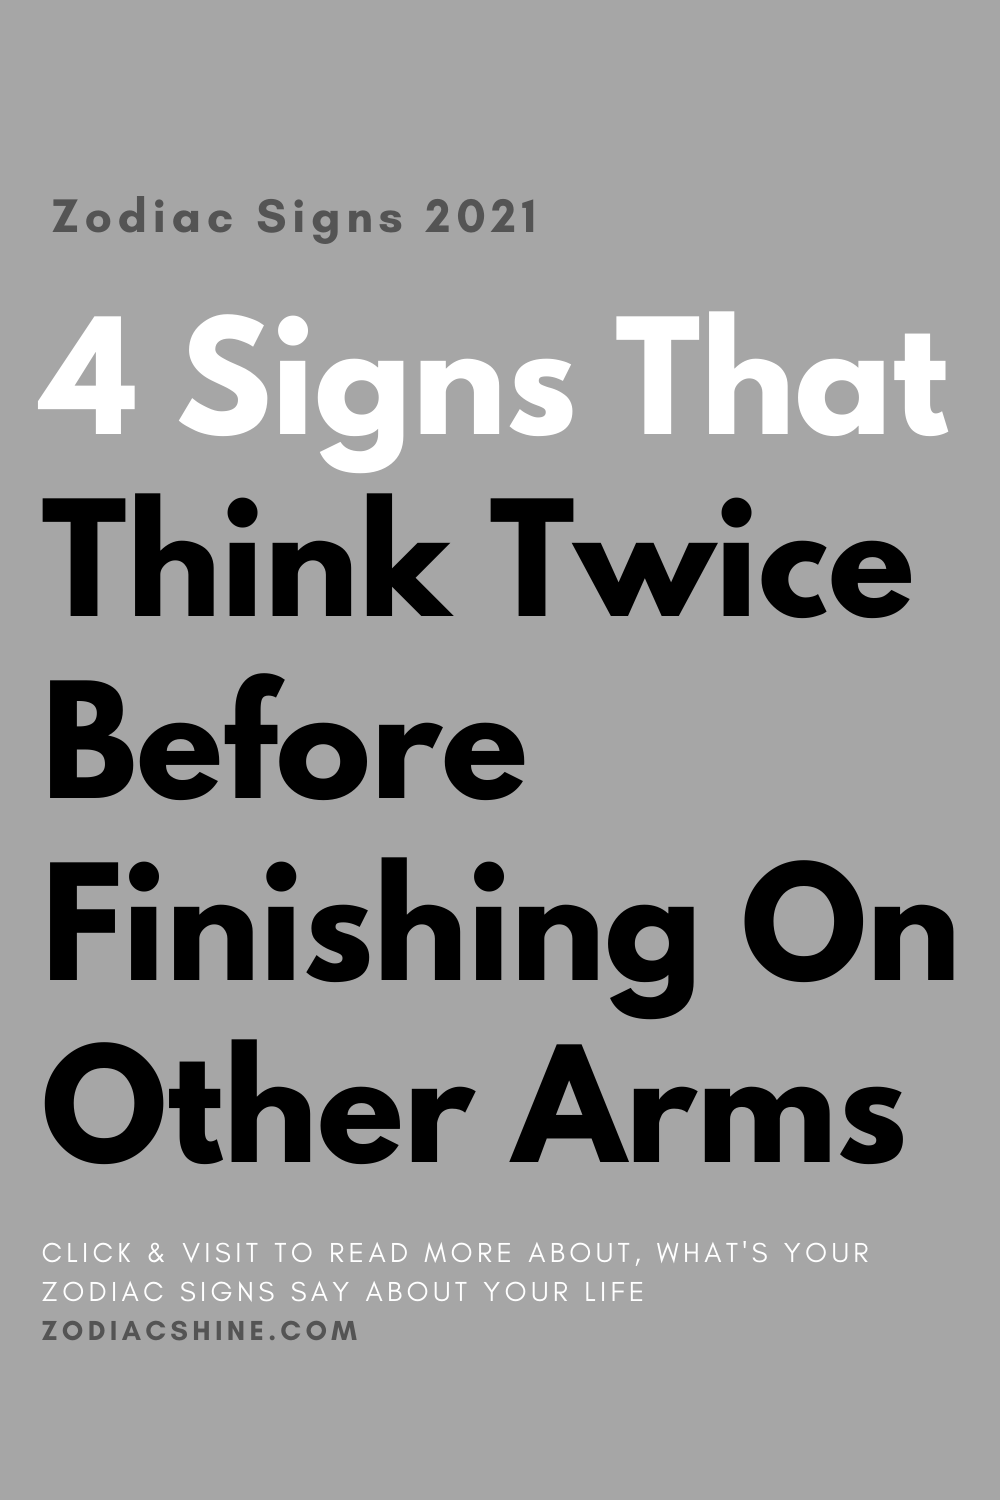 4 Signs That Think Twice Before Finishing On Other Arms